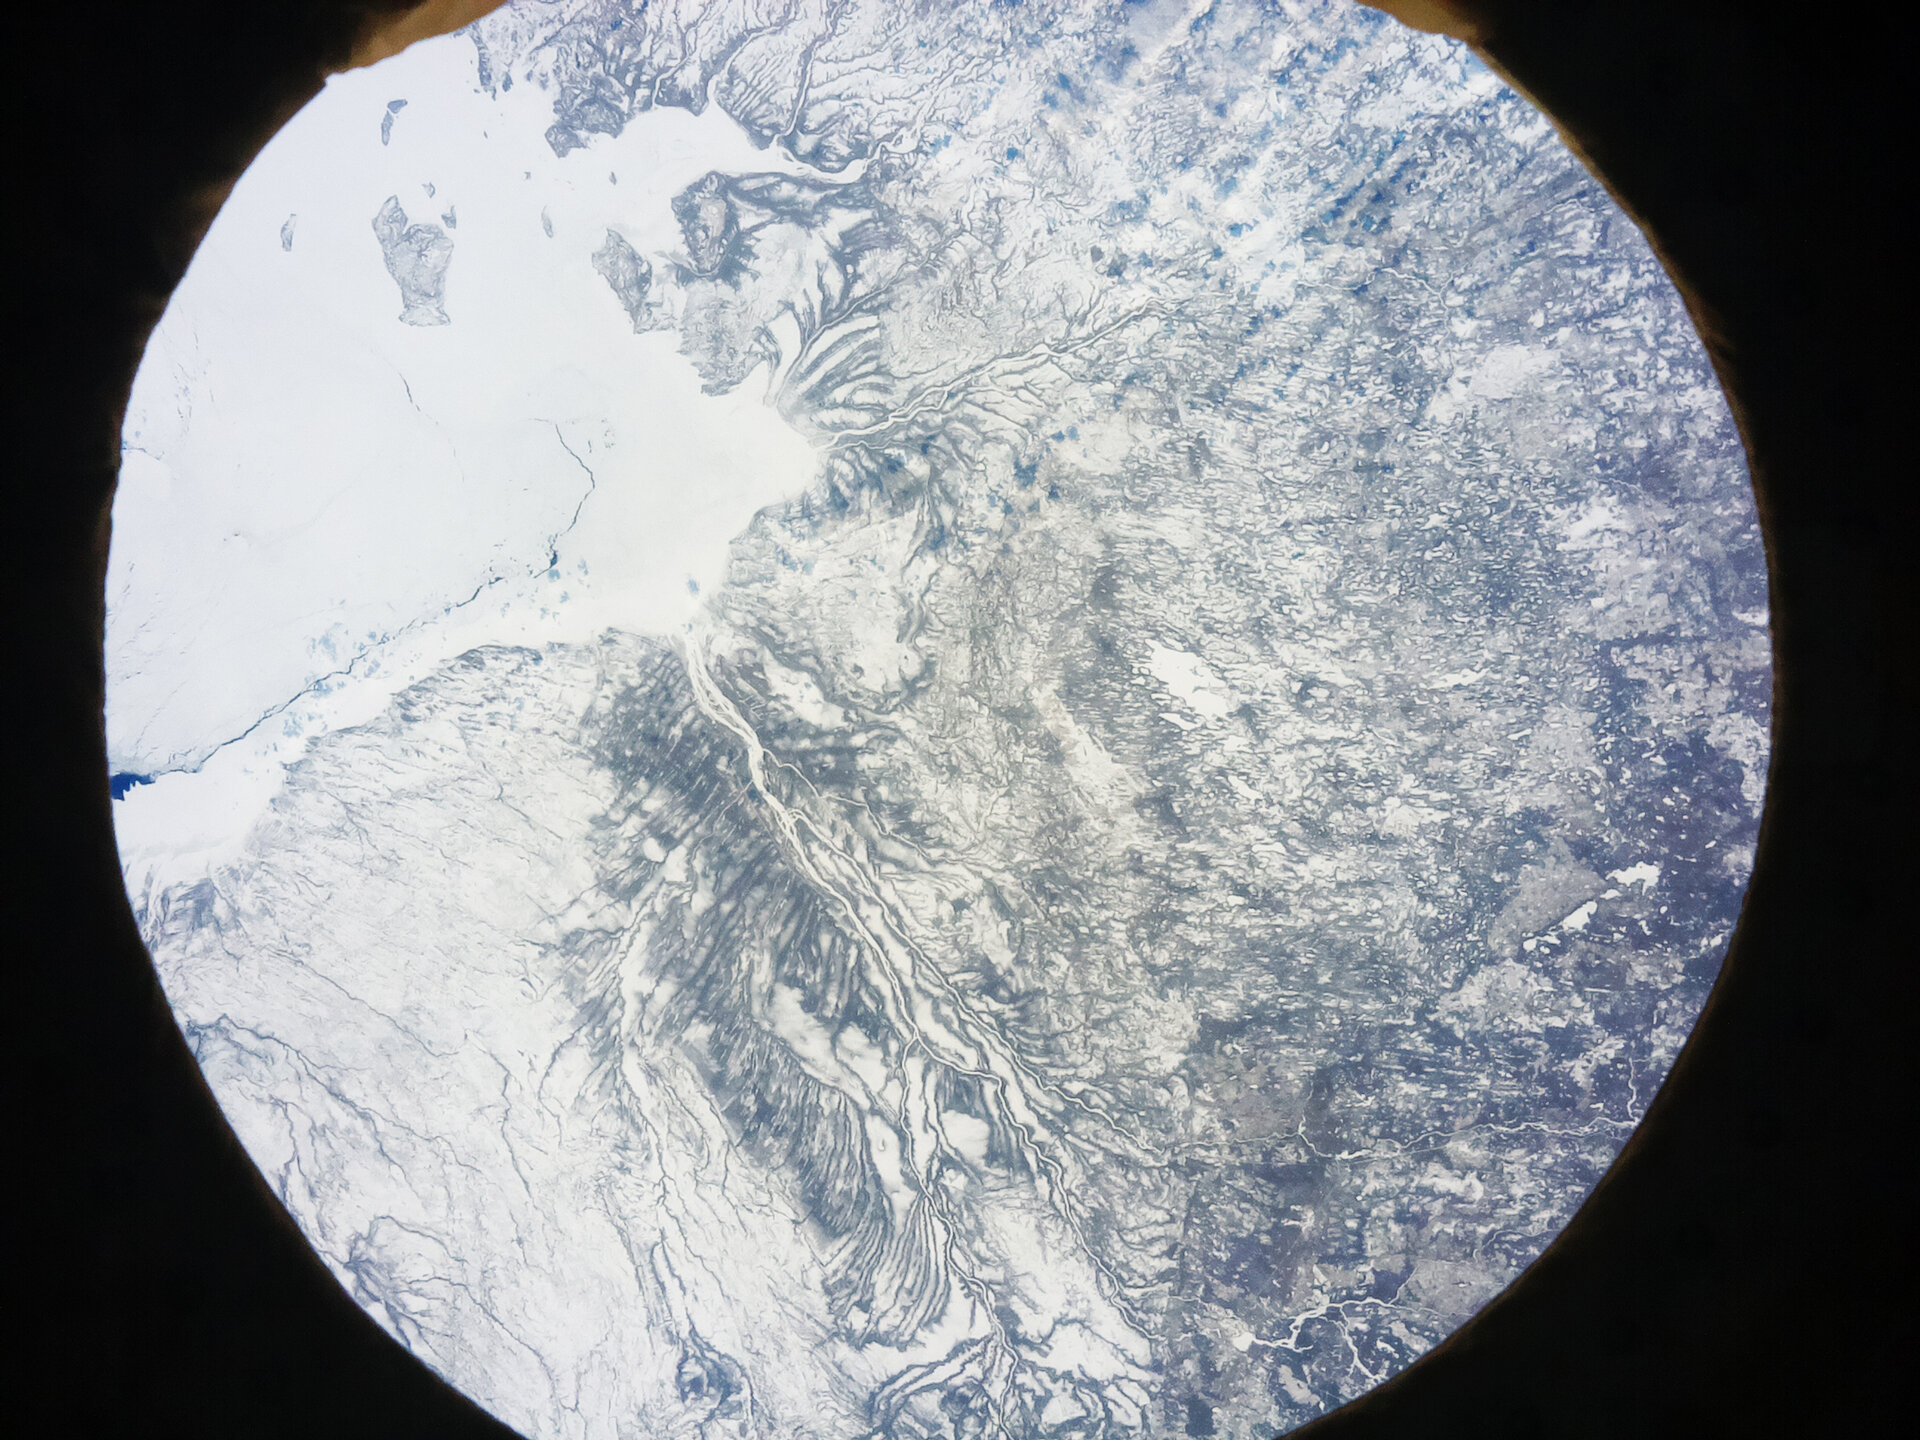 Astro Pi data shows snowy scenes at the southern tip of Hudson Bay in Canada